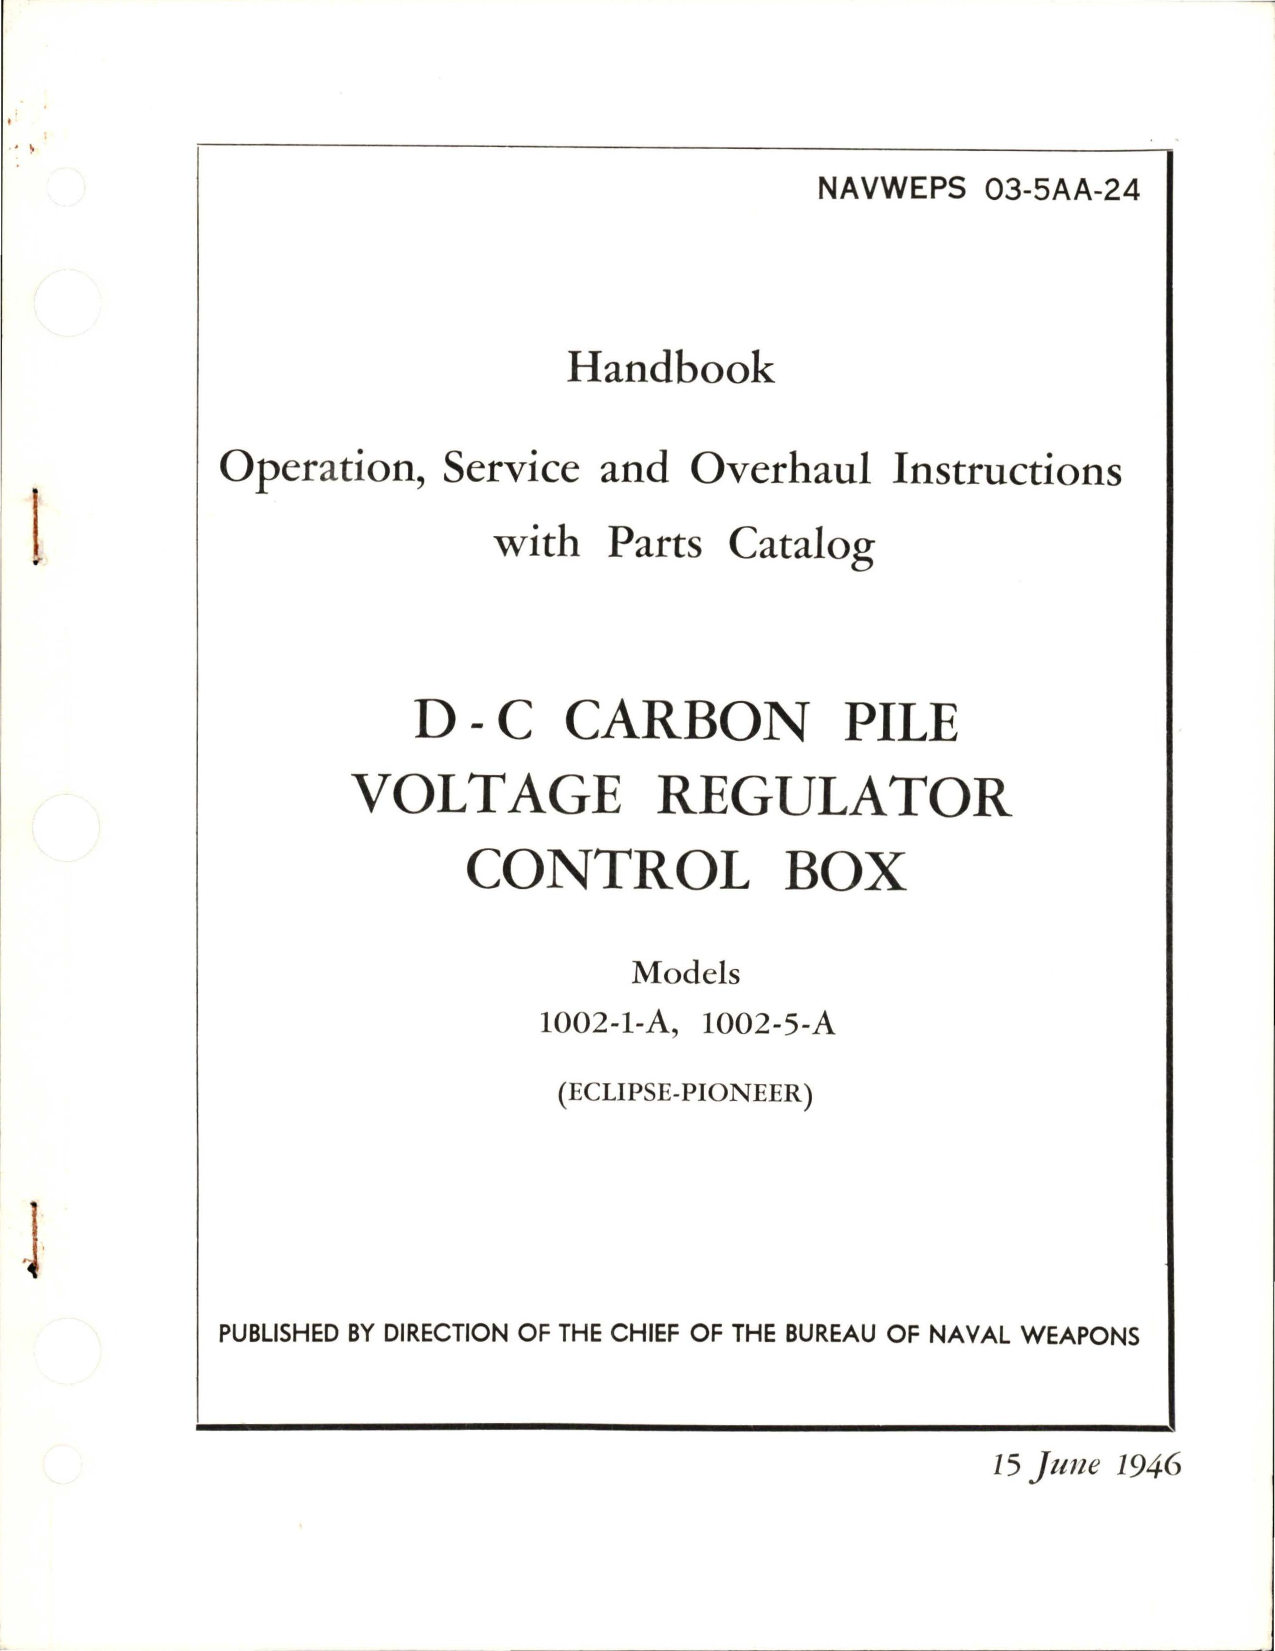 Sample page 1 from AirCorps Library document: Operation, Service and Overhaul Instructions with Parts Catalog for D-C Carbon Pile Voltage Regulator Control Box - Models 1002-1-A and 1002-5-A